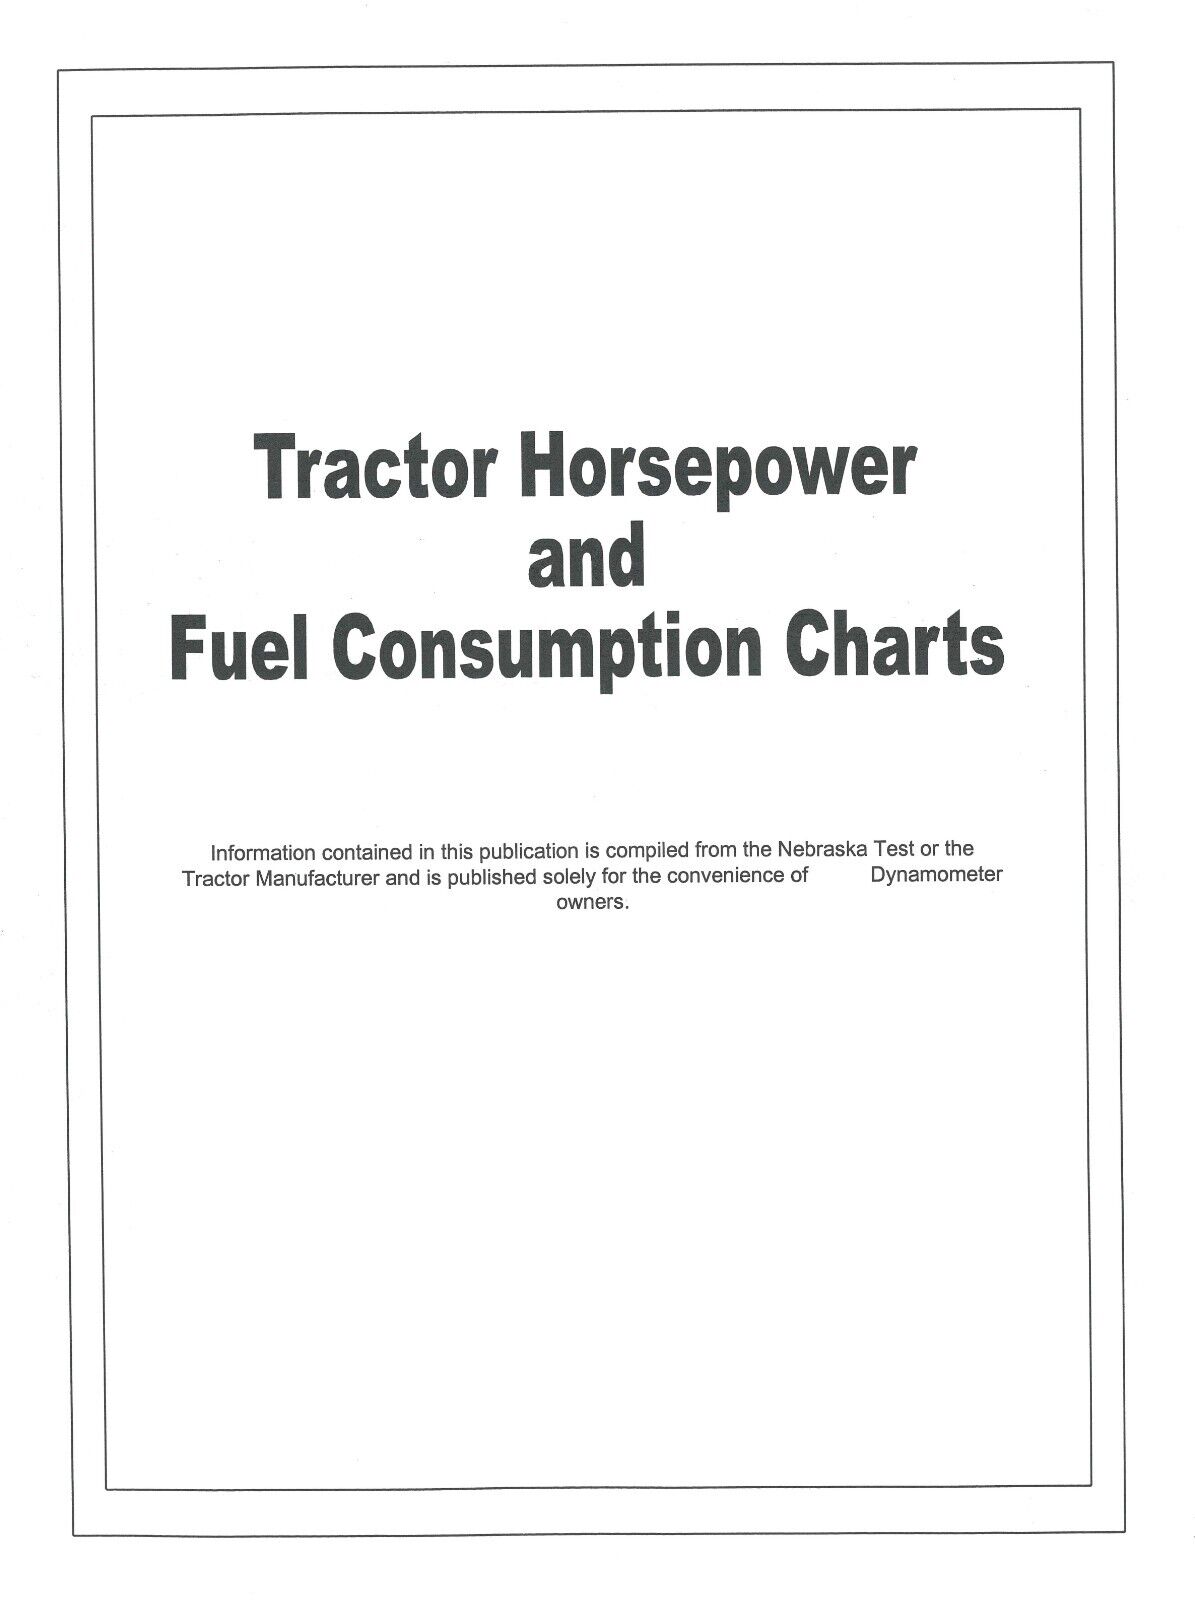 M&W Sep 1997 Tractor Horsepower & Fuel Consumption Charts Dynamometer Data Dyno